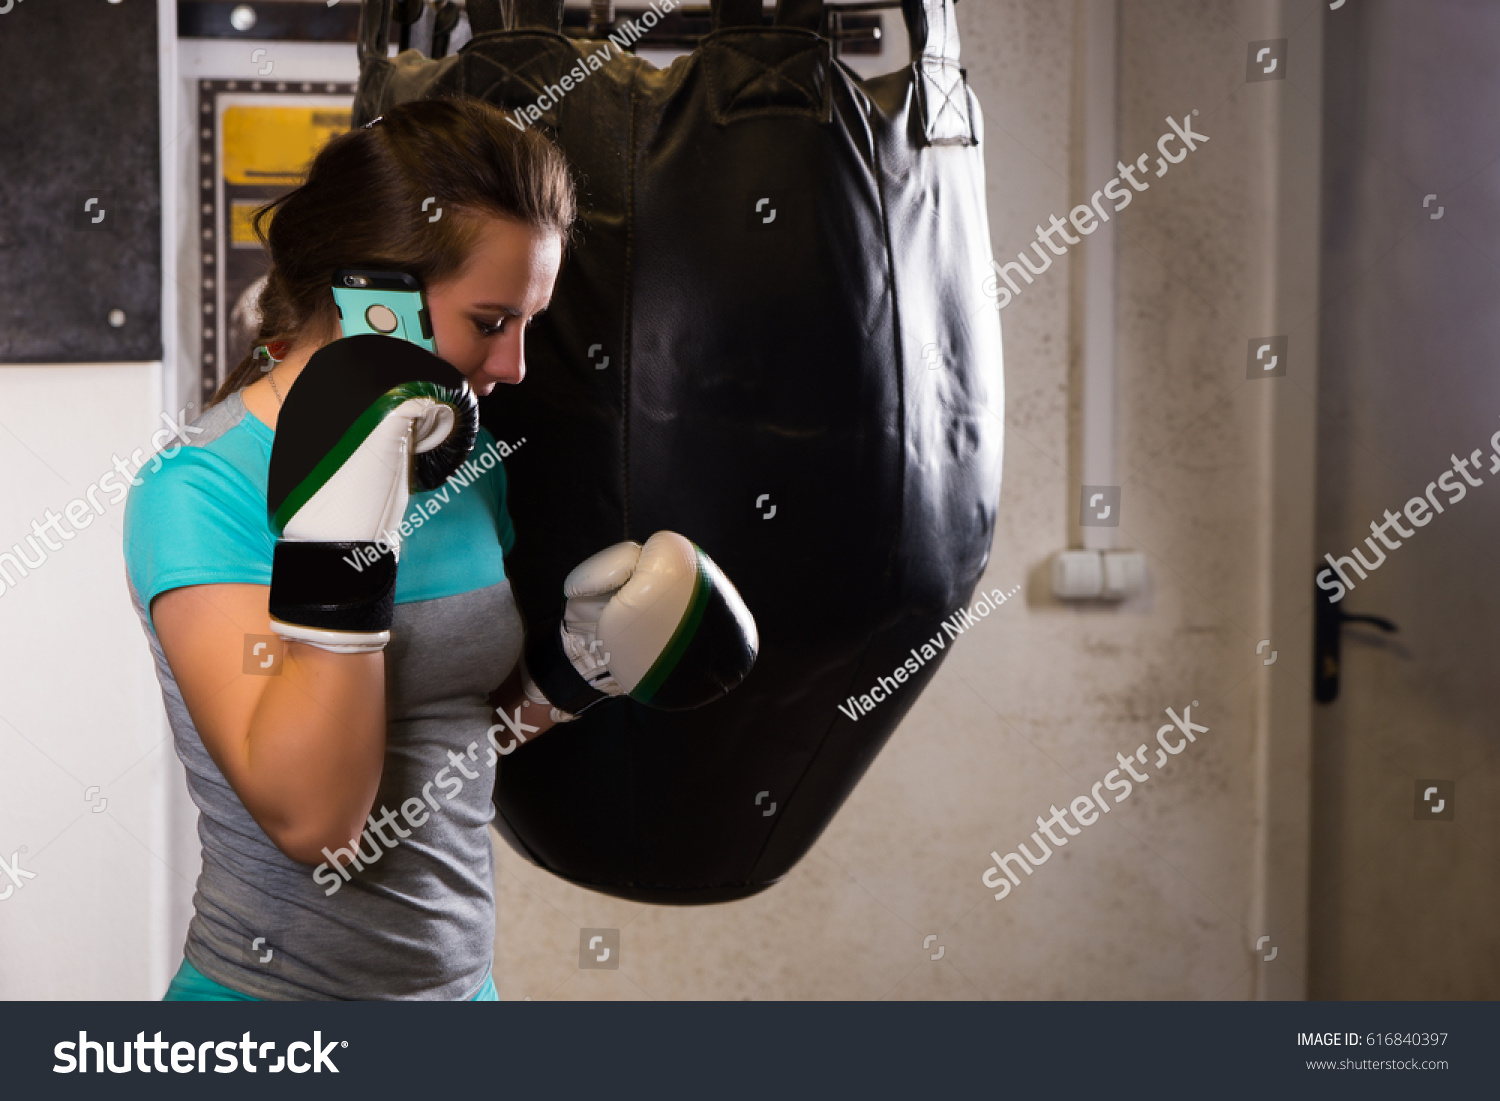 Young Female Boxer Boxing Gloves Standing Stock Photo 616840397 - Shutterstock